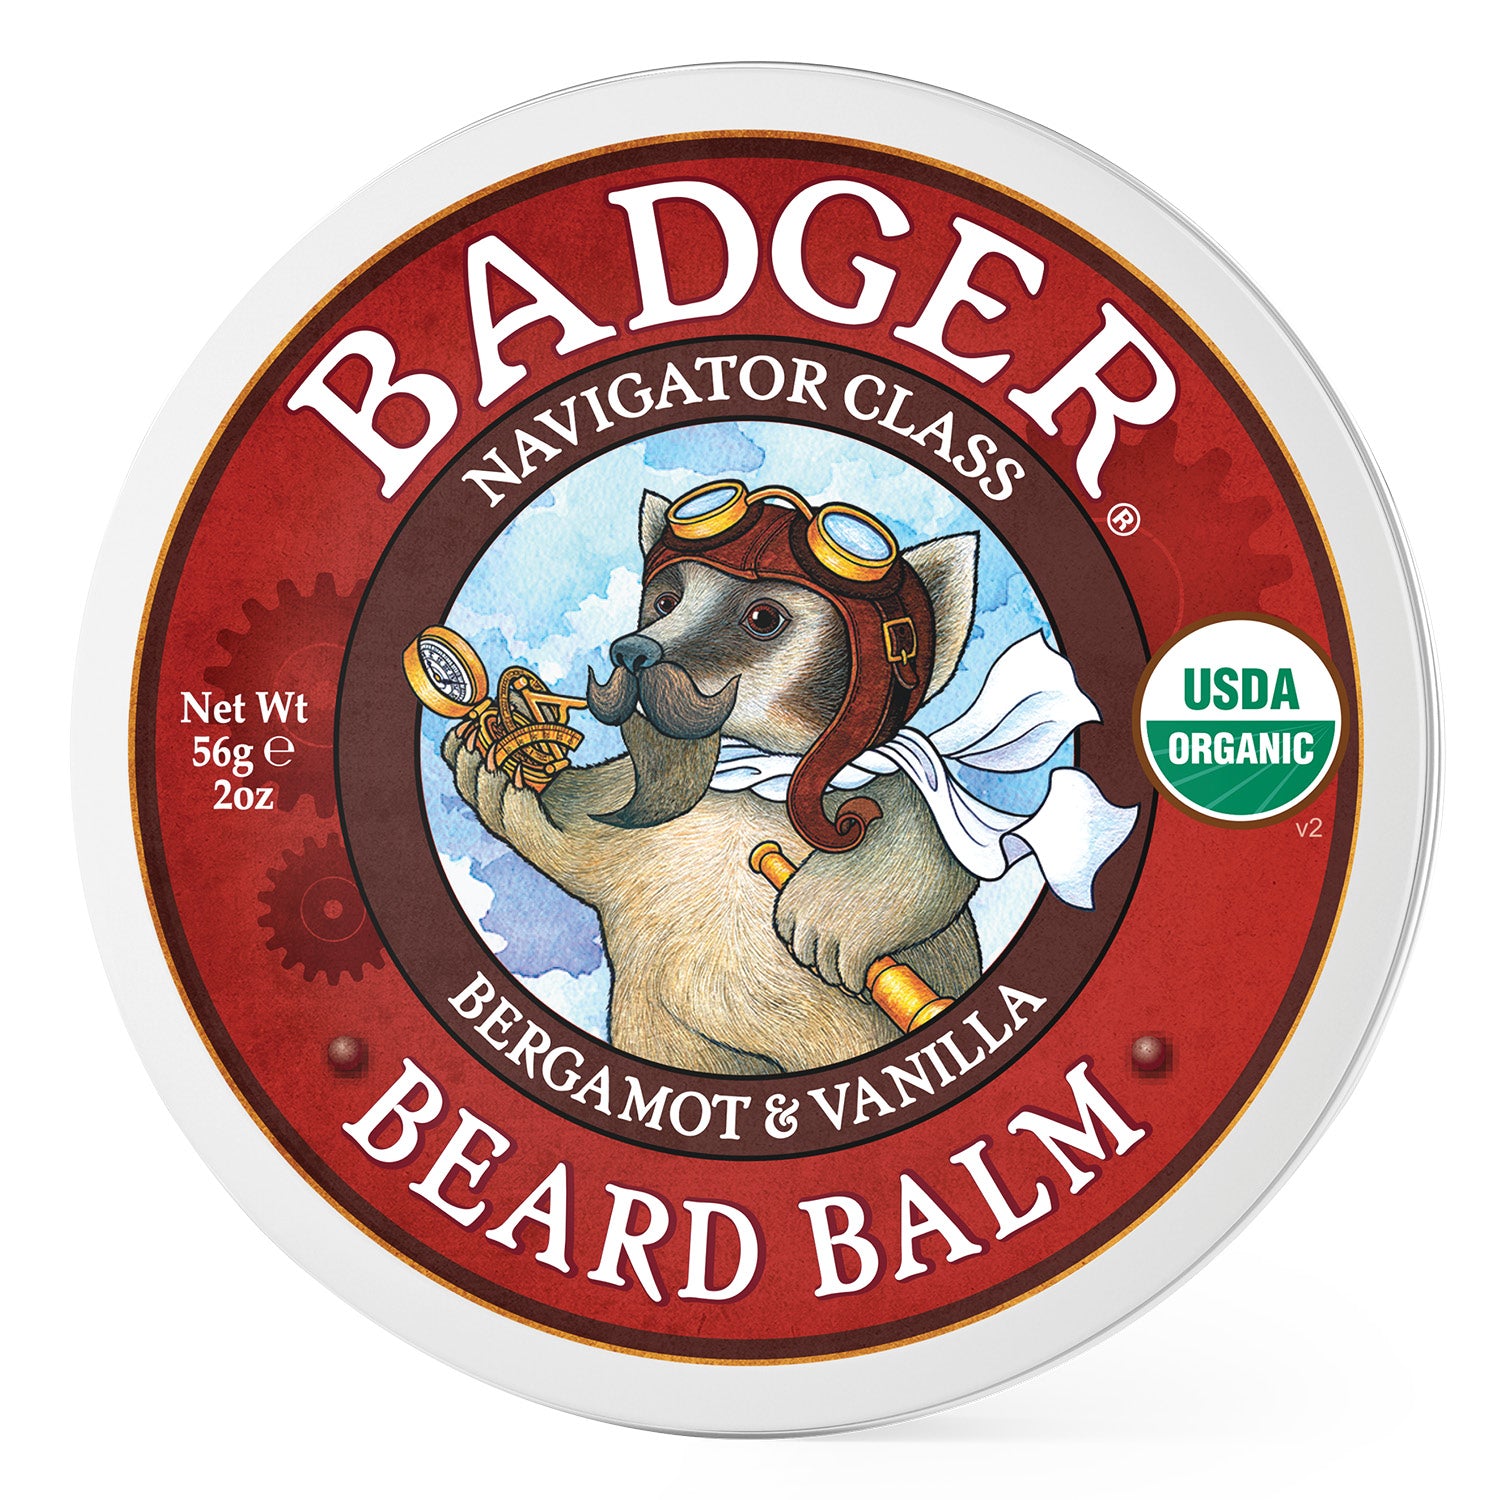 Beard Balm - Conditioning Styling Aid | Badger Balm – BADGER